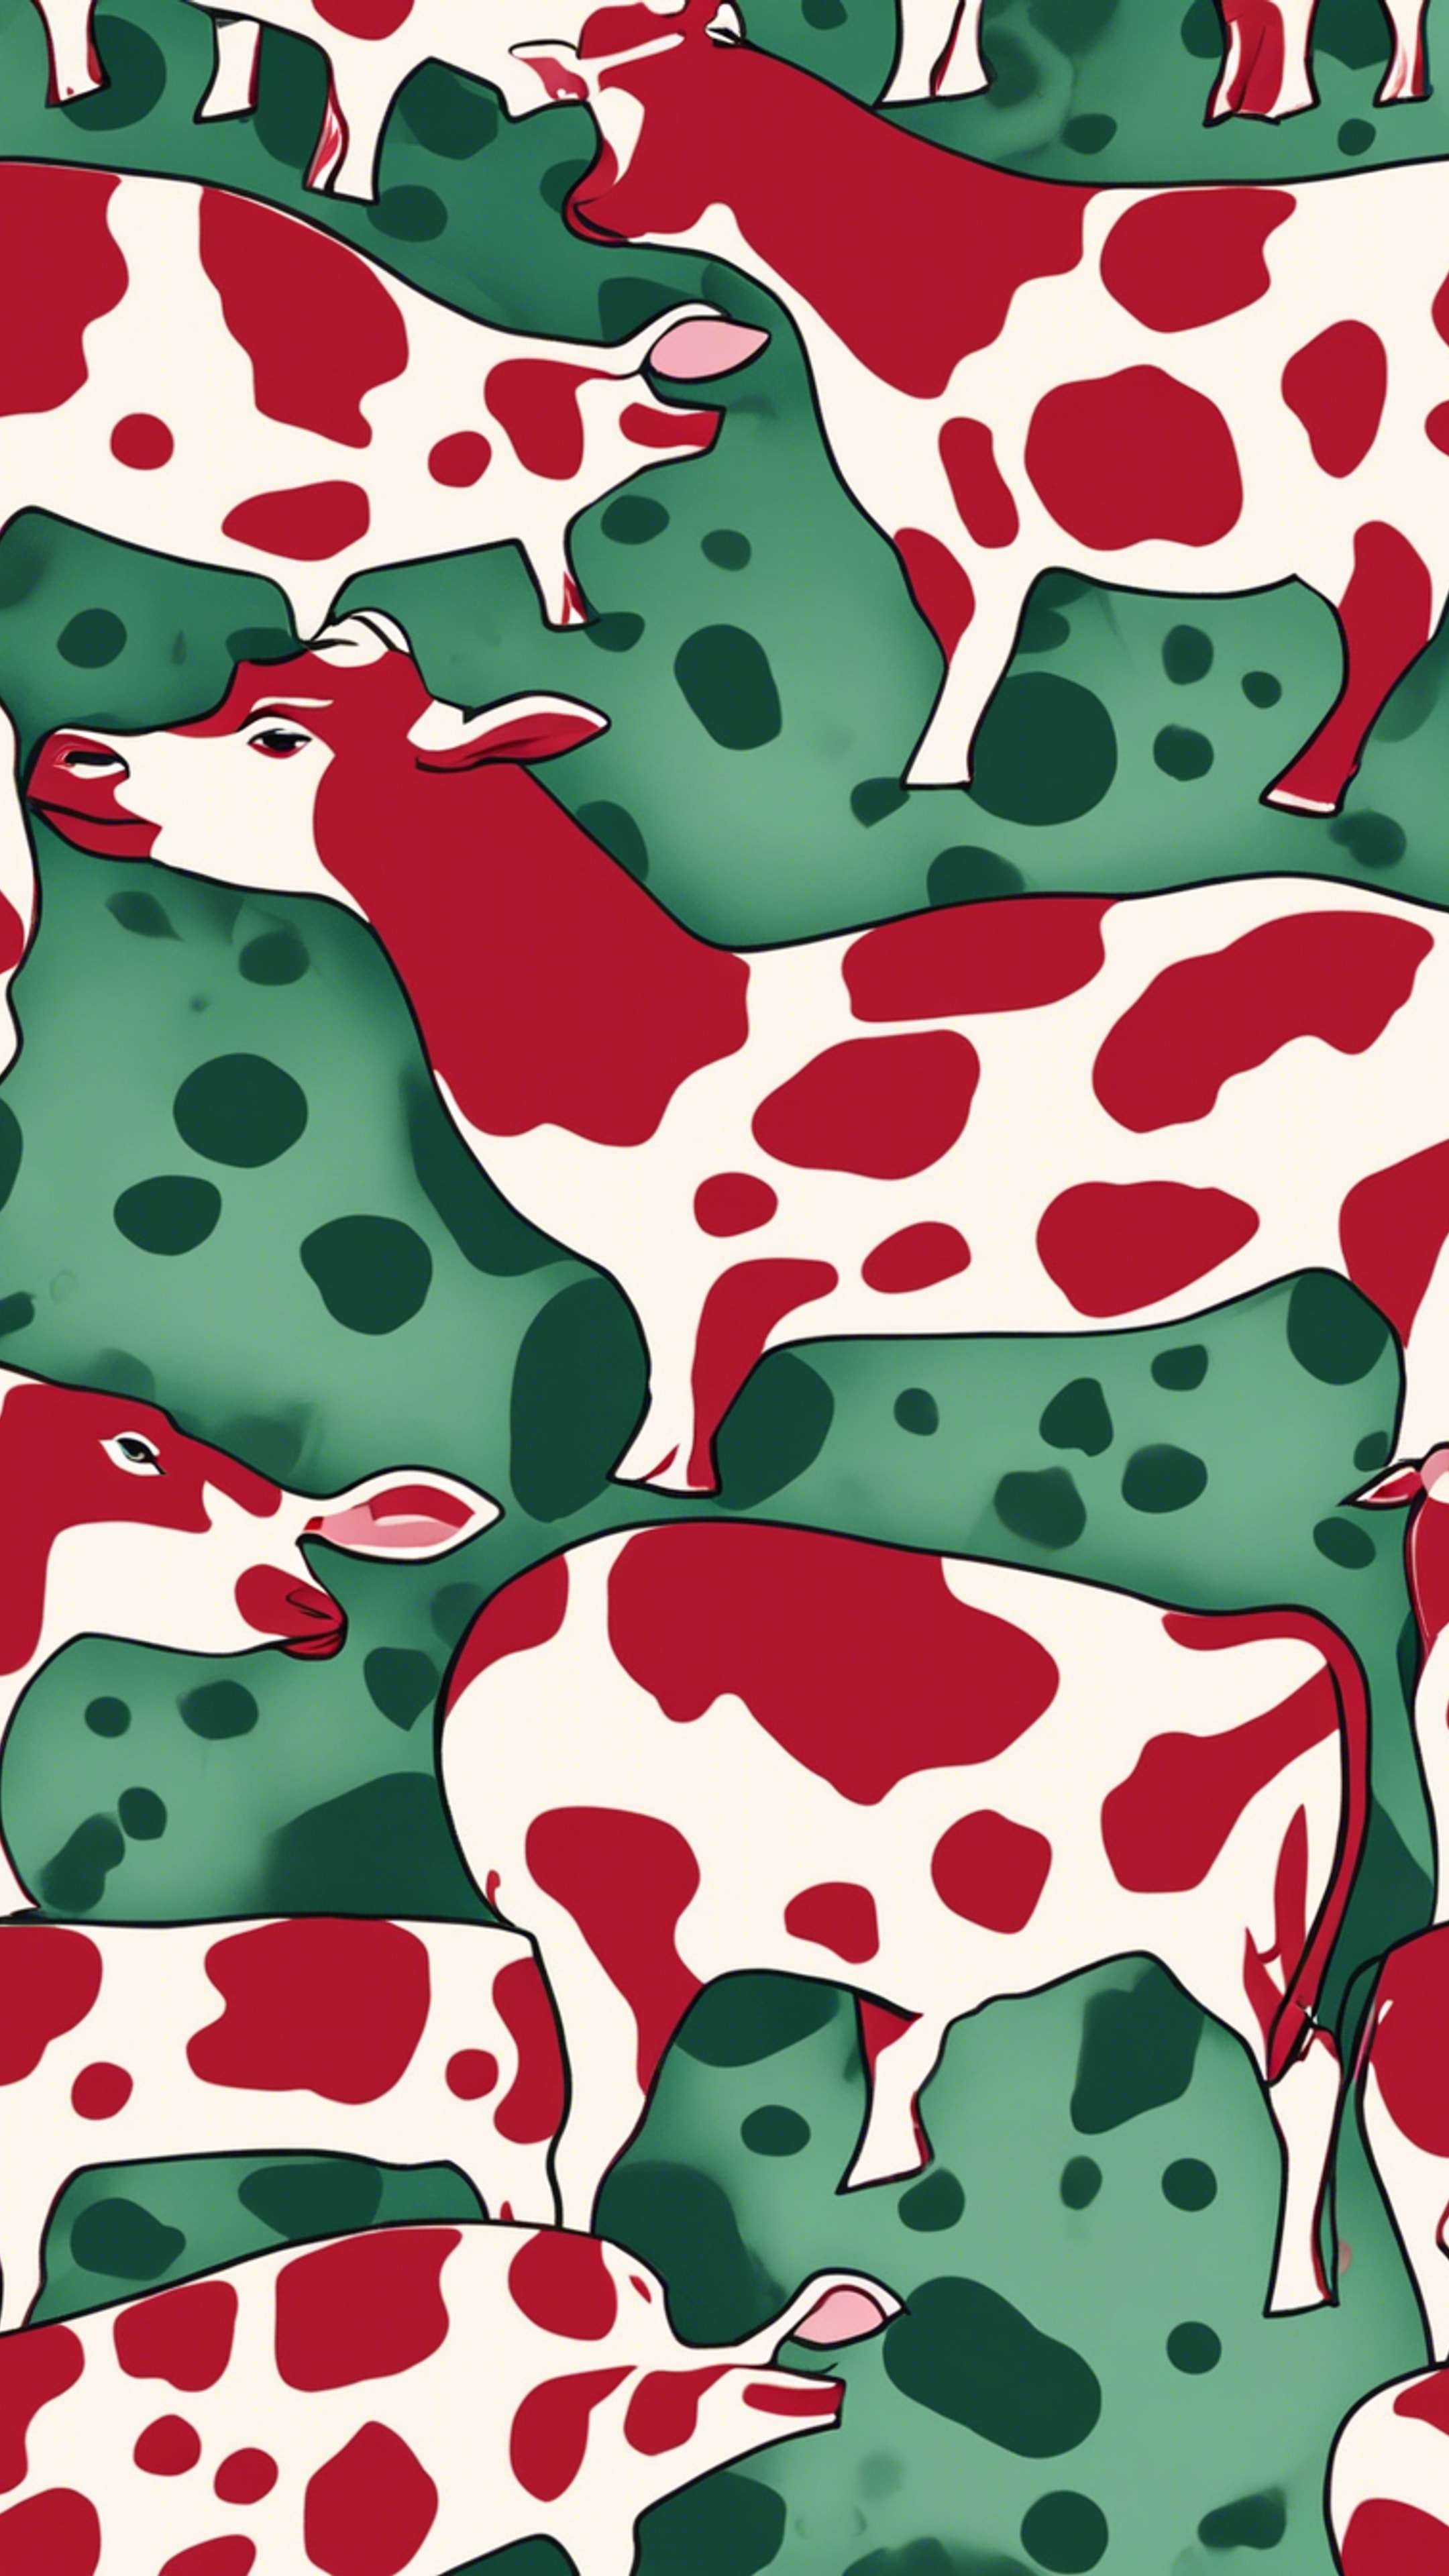 A dynamic, textured pattern of red and green cow spots. Tapeta[159333102a774de6a0e2]